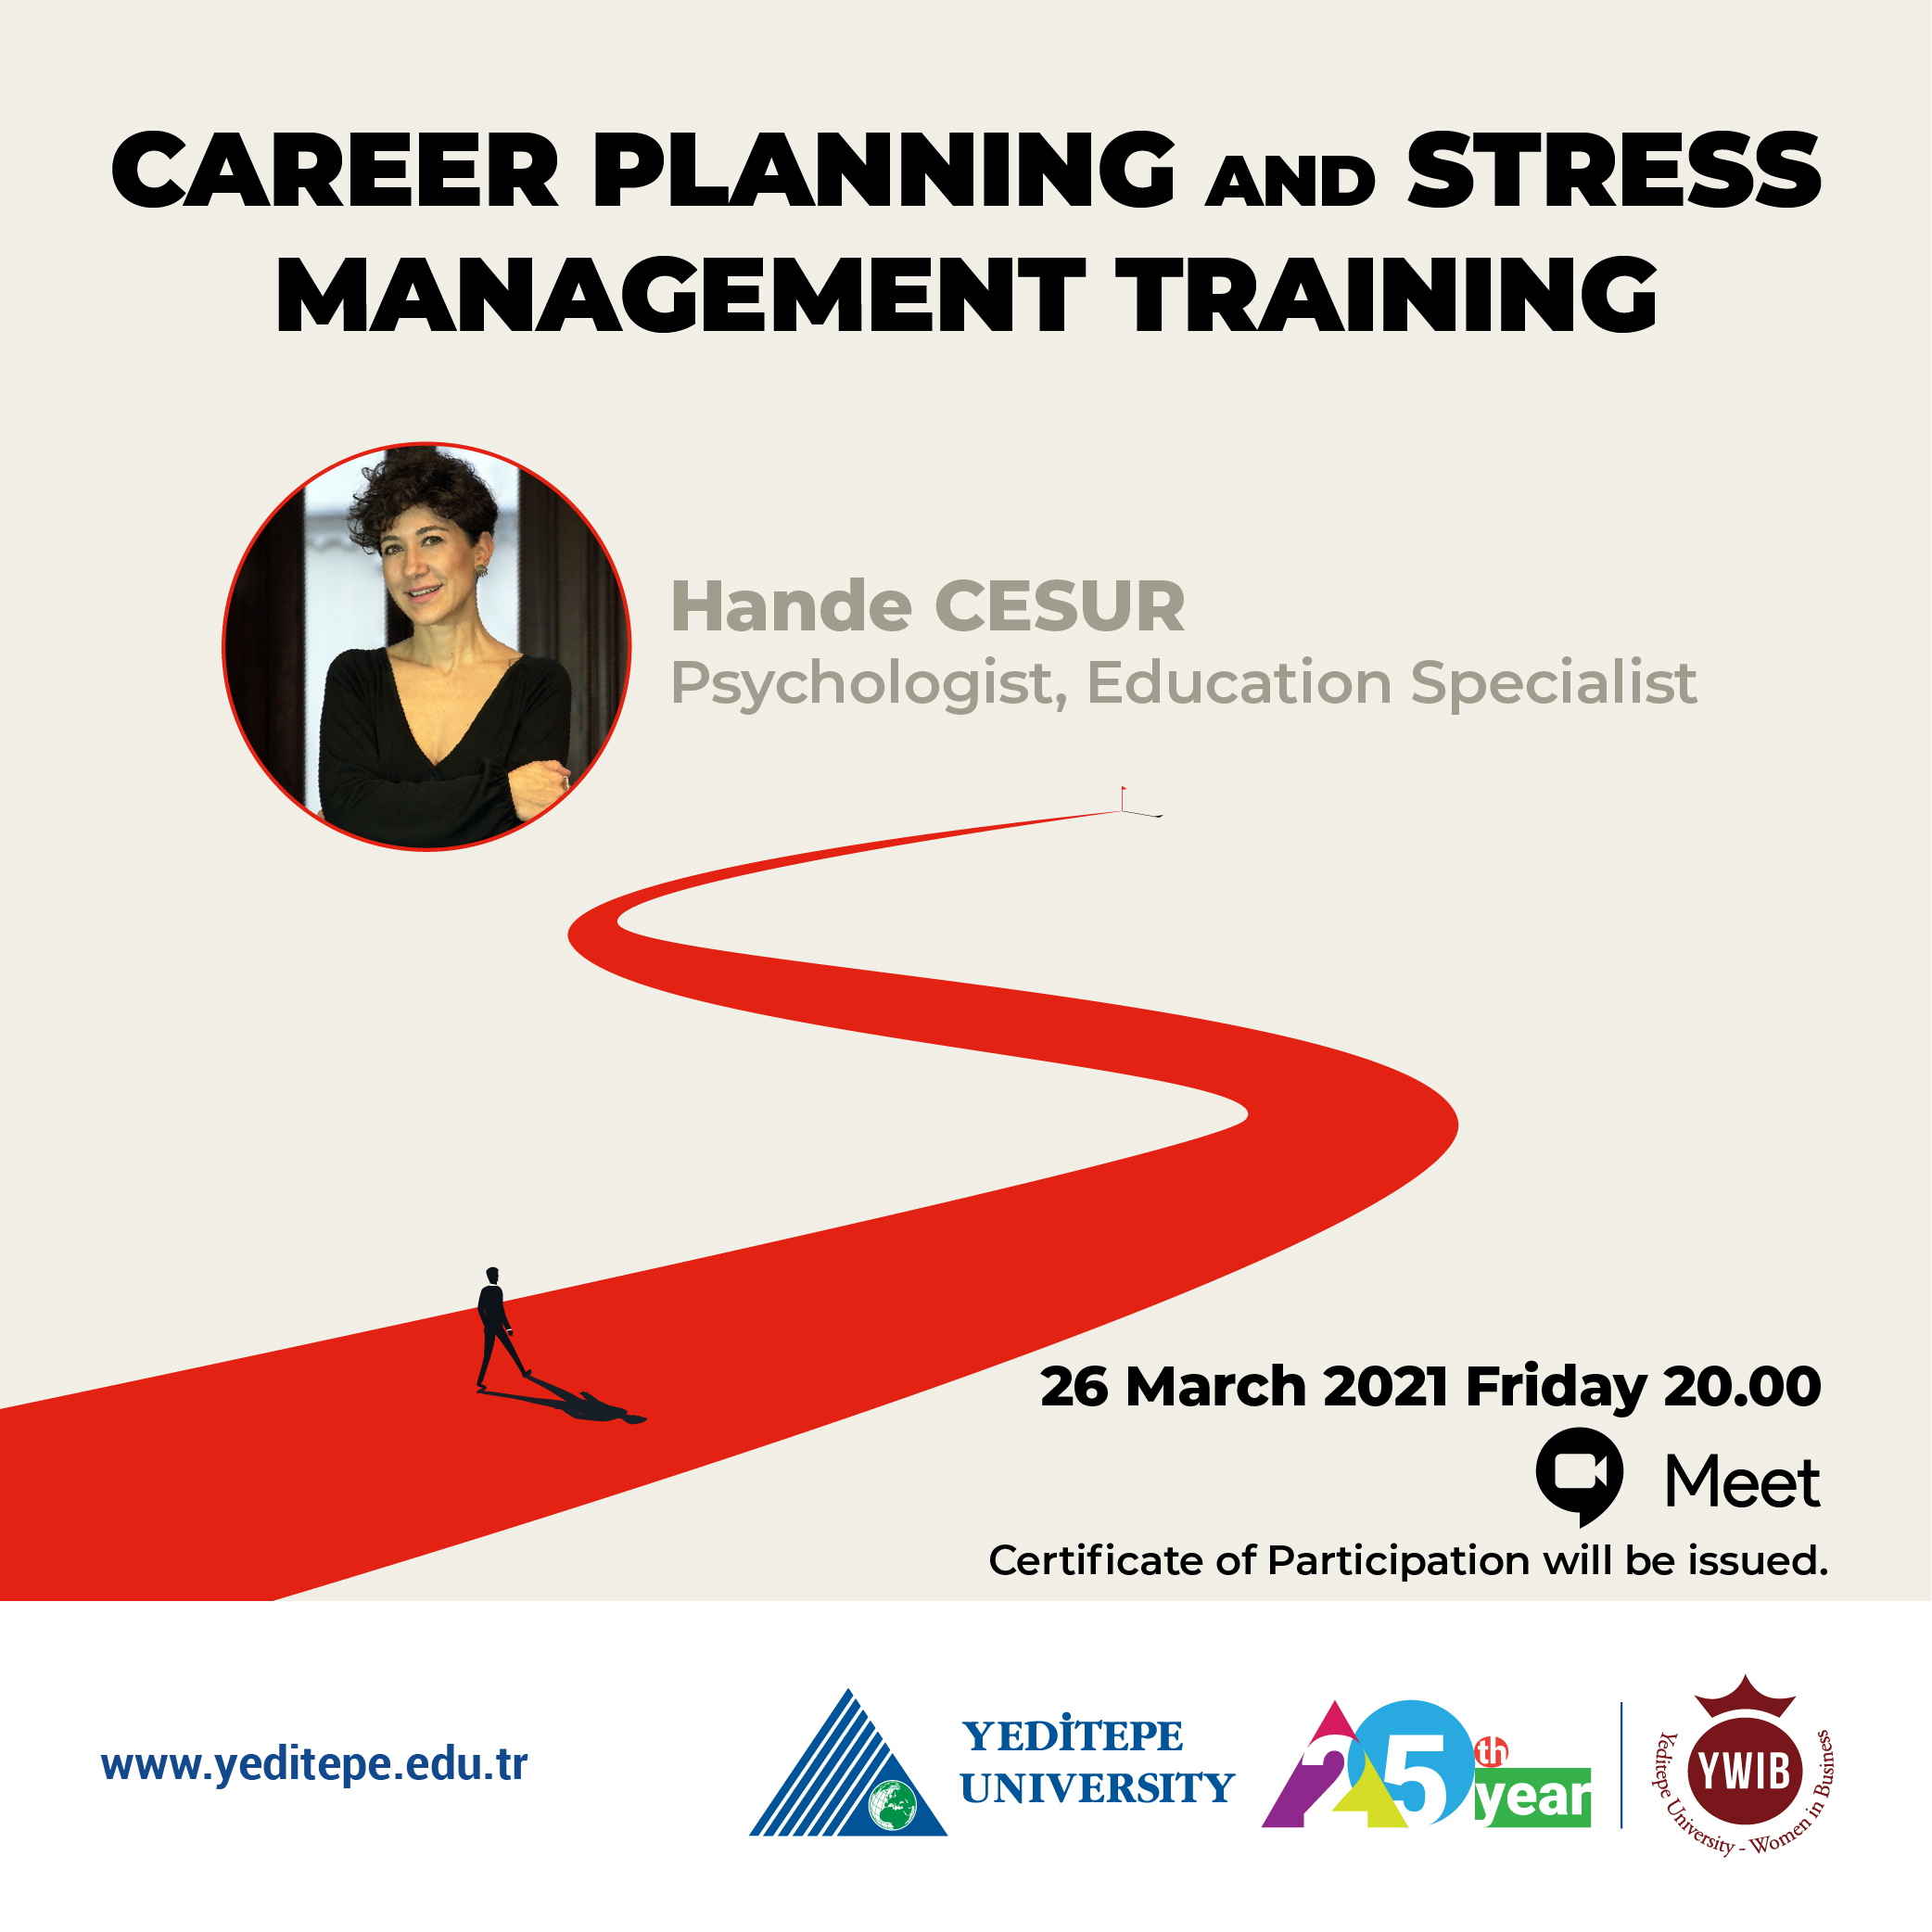 Career Planning and Stress Management Training